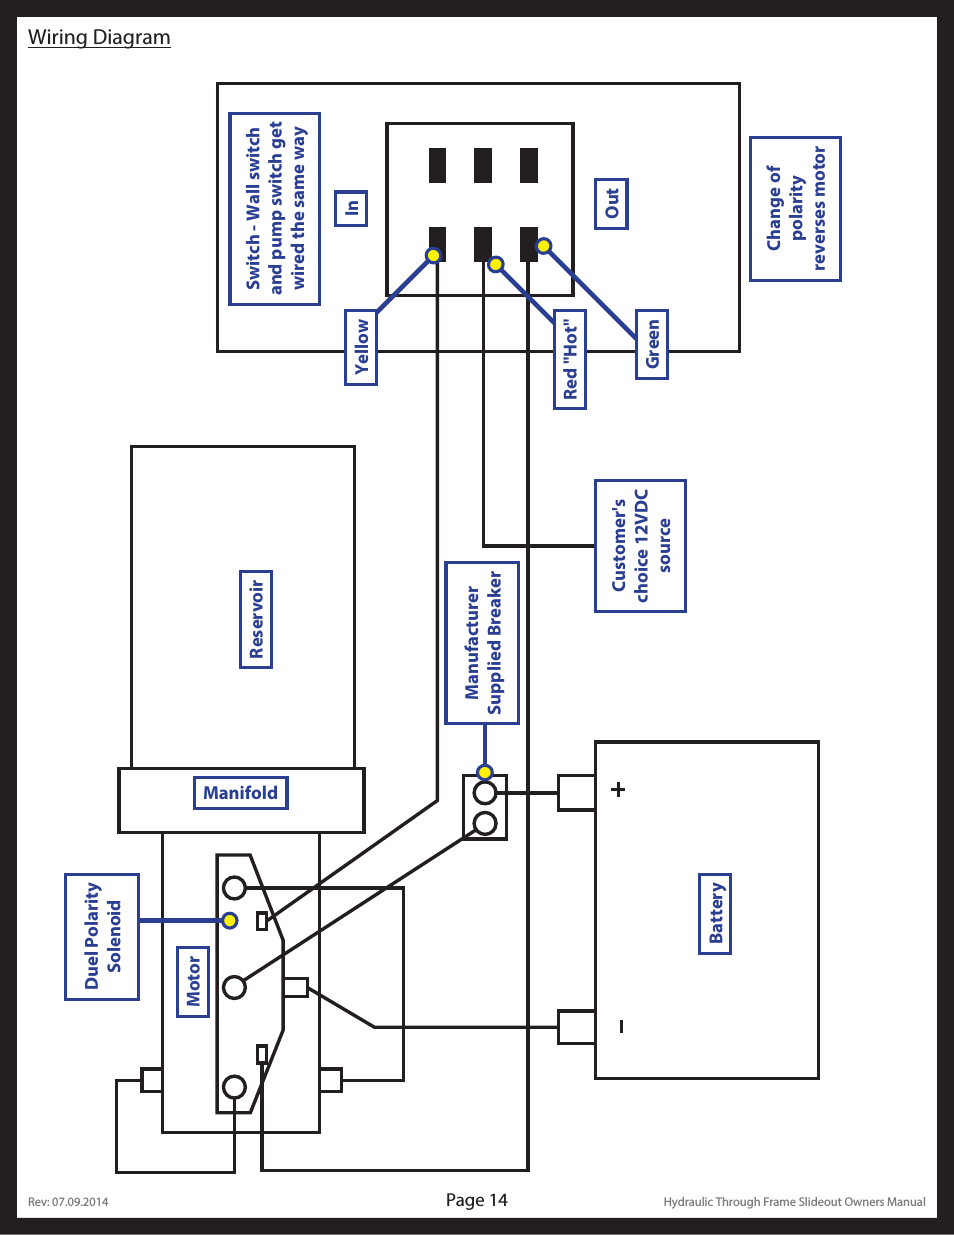 Diagram Slide Out Switch Wiring Diagram Full Version Hd Quality Wiring Diagram Seemdiagram Eracleaturismo It